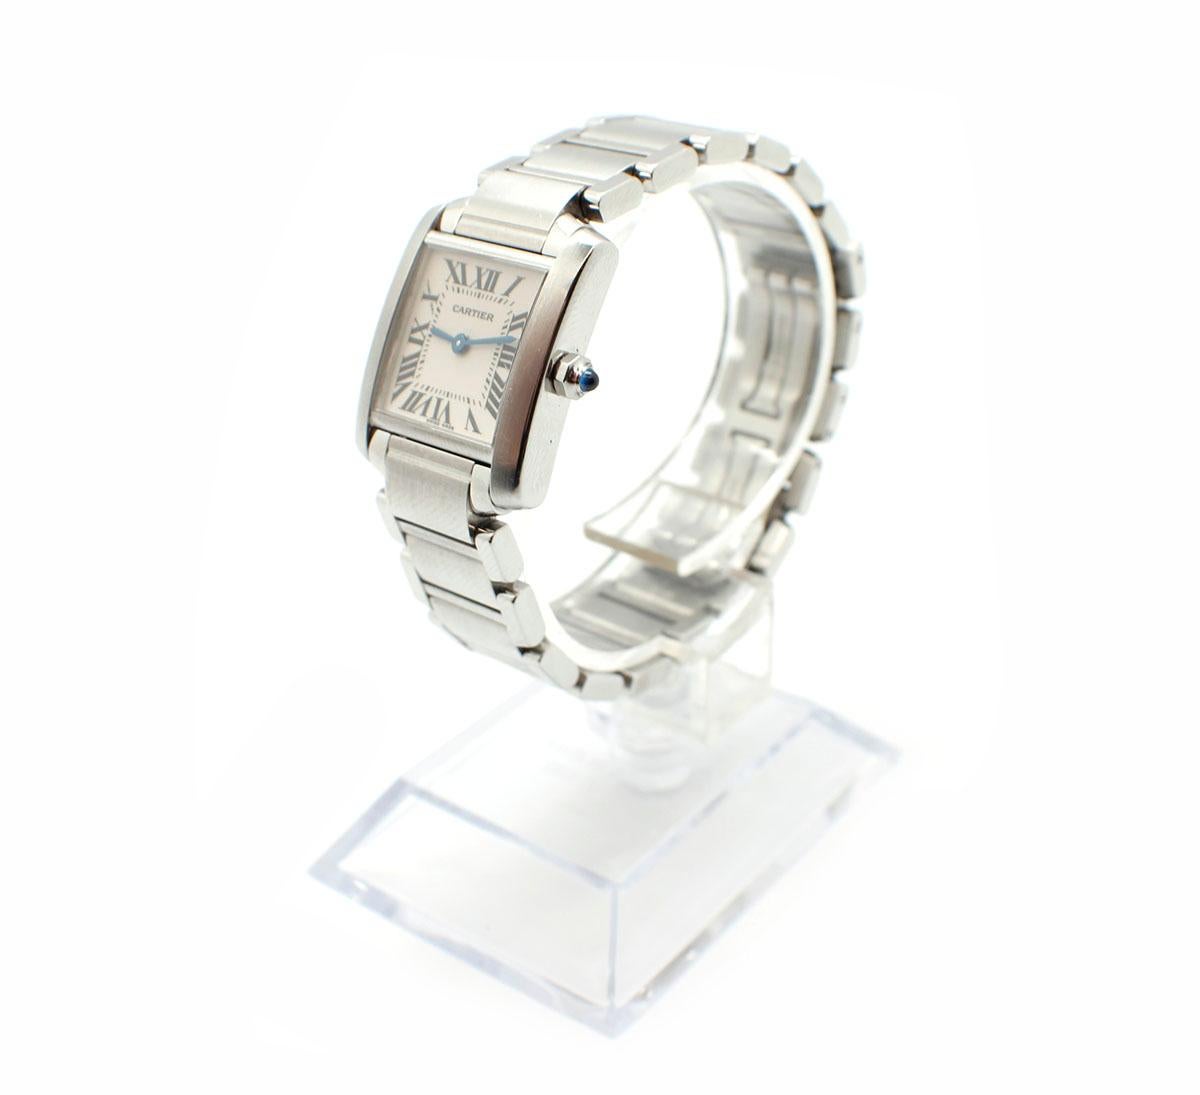 Movement: quartz
Function: hours, minutes
Case: 20mm stainless steel case, sapphire crystal
Band: stainless steel bracelet, steel clasp, fits up to a 6.25-inch wrist
Dial: cream dial, blue hands, black Roman numerals
Reference #: 2384
Serial #: